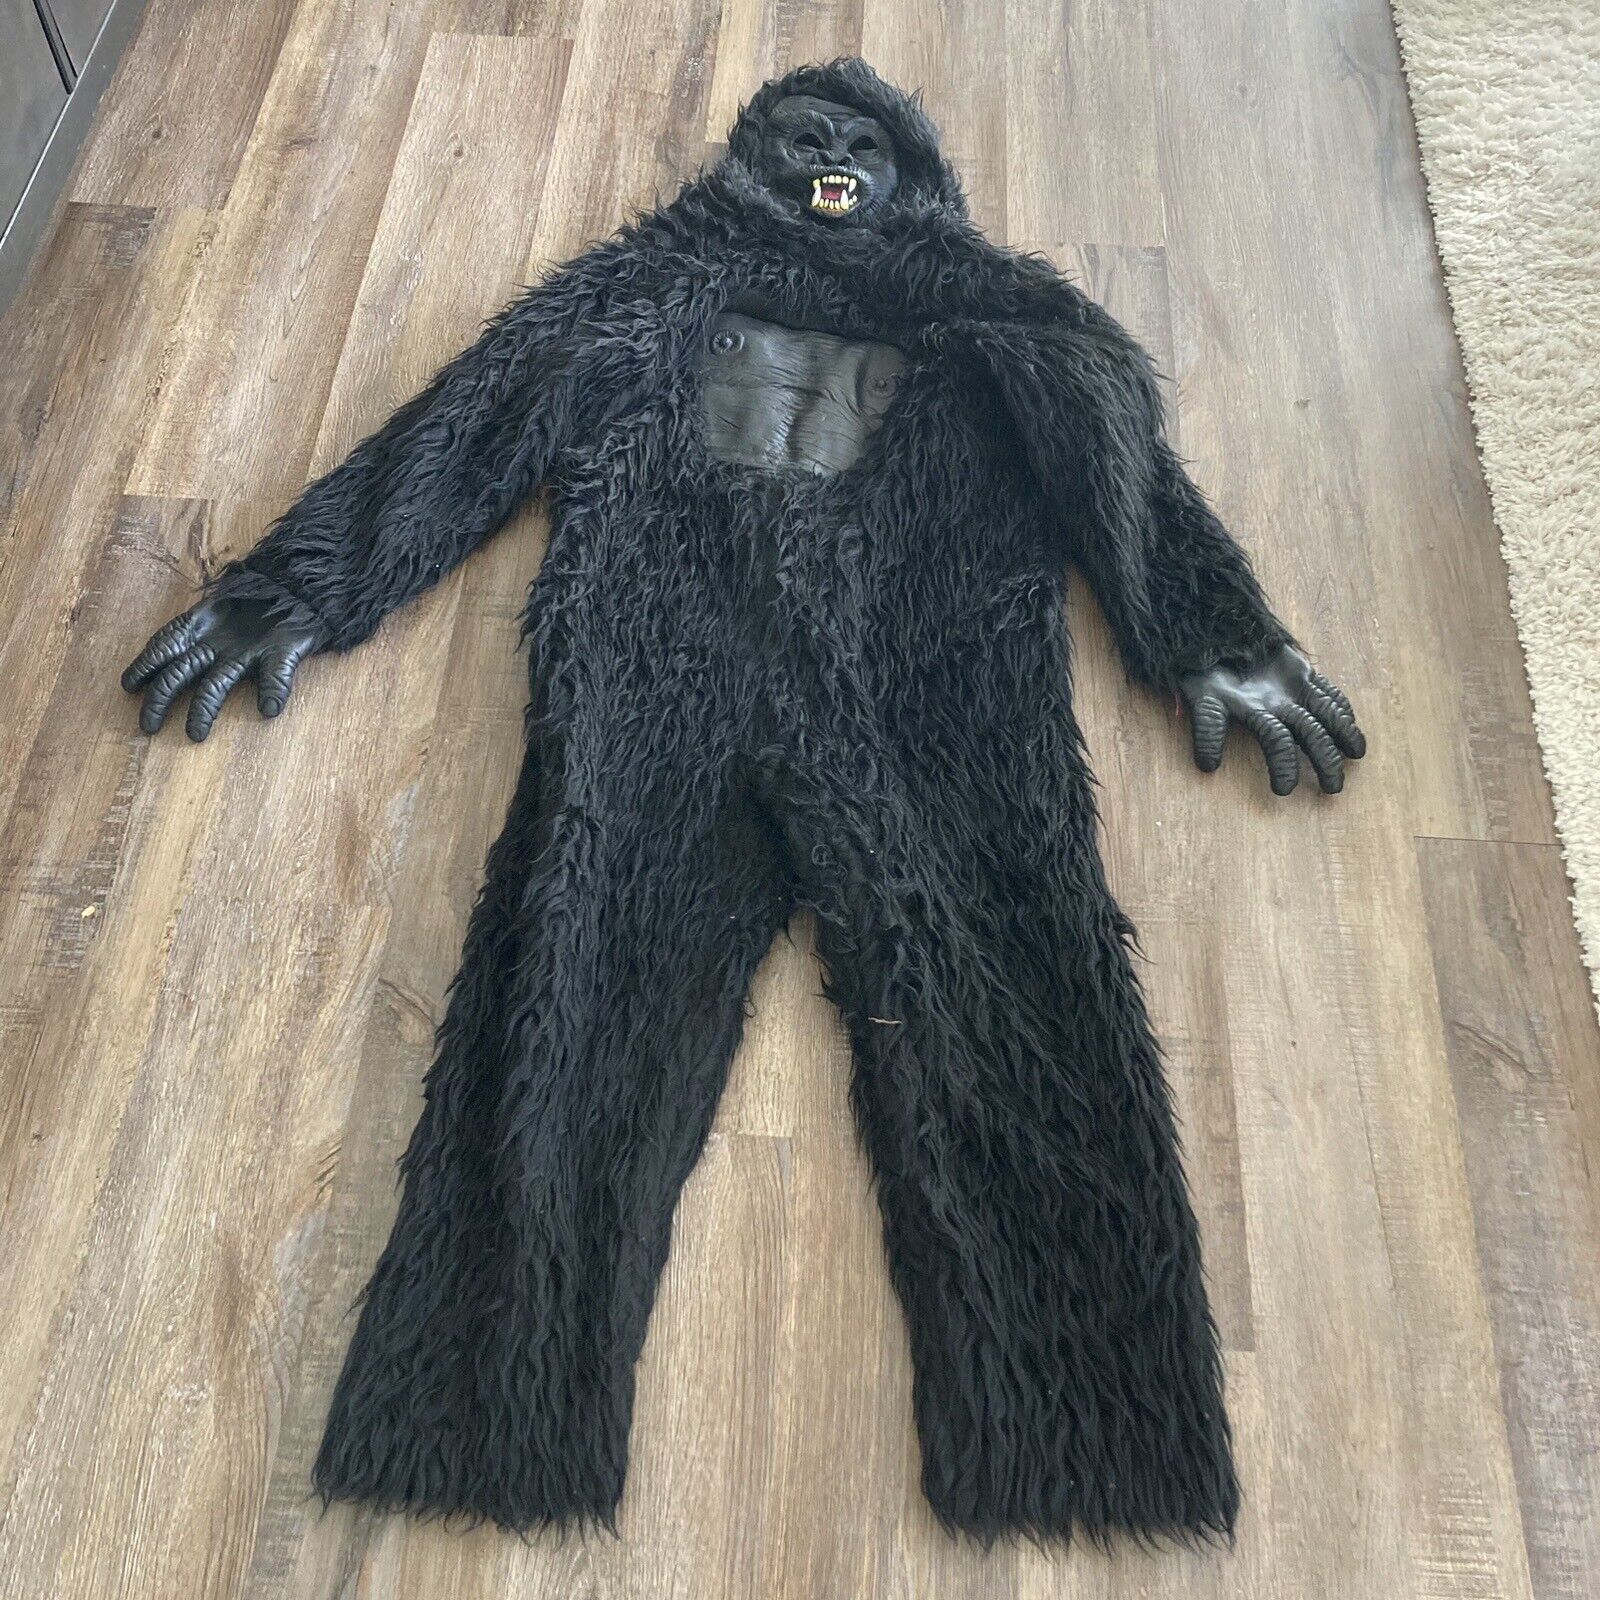 GORILLA APE HALLOWEEN COSTUME, SMALL SUIT, BLACK, MASK GLOVE OUTFIT TARGET